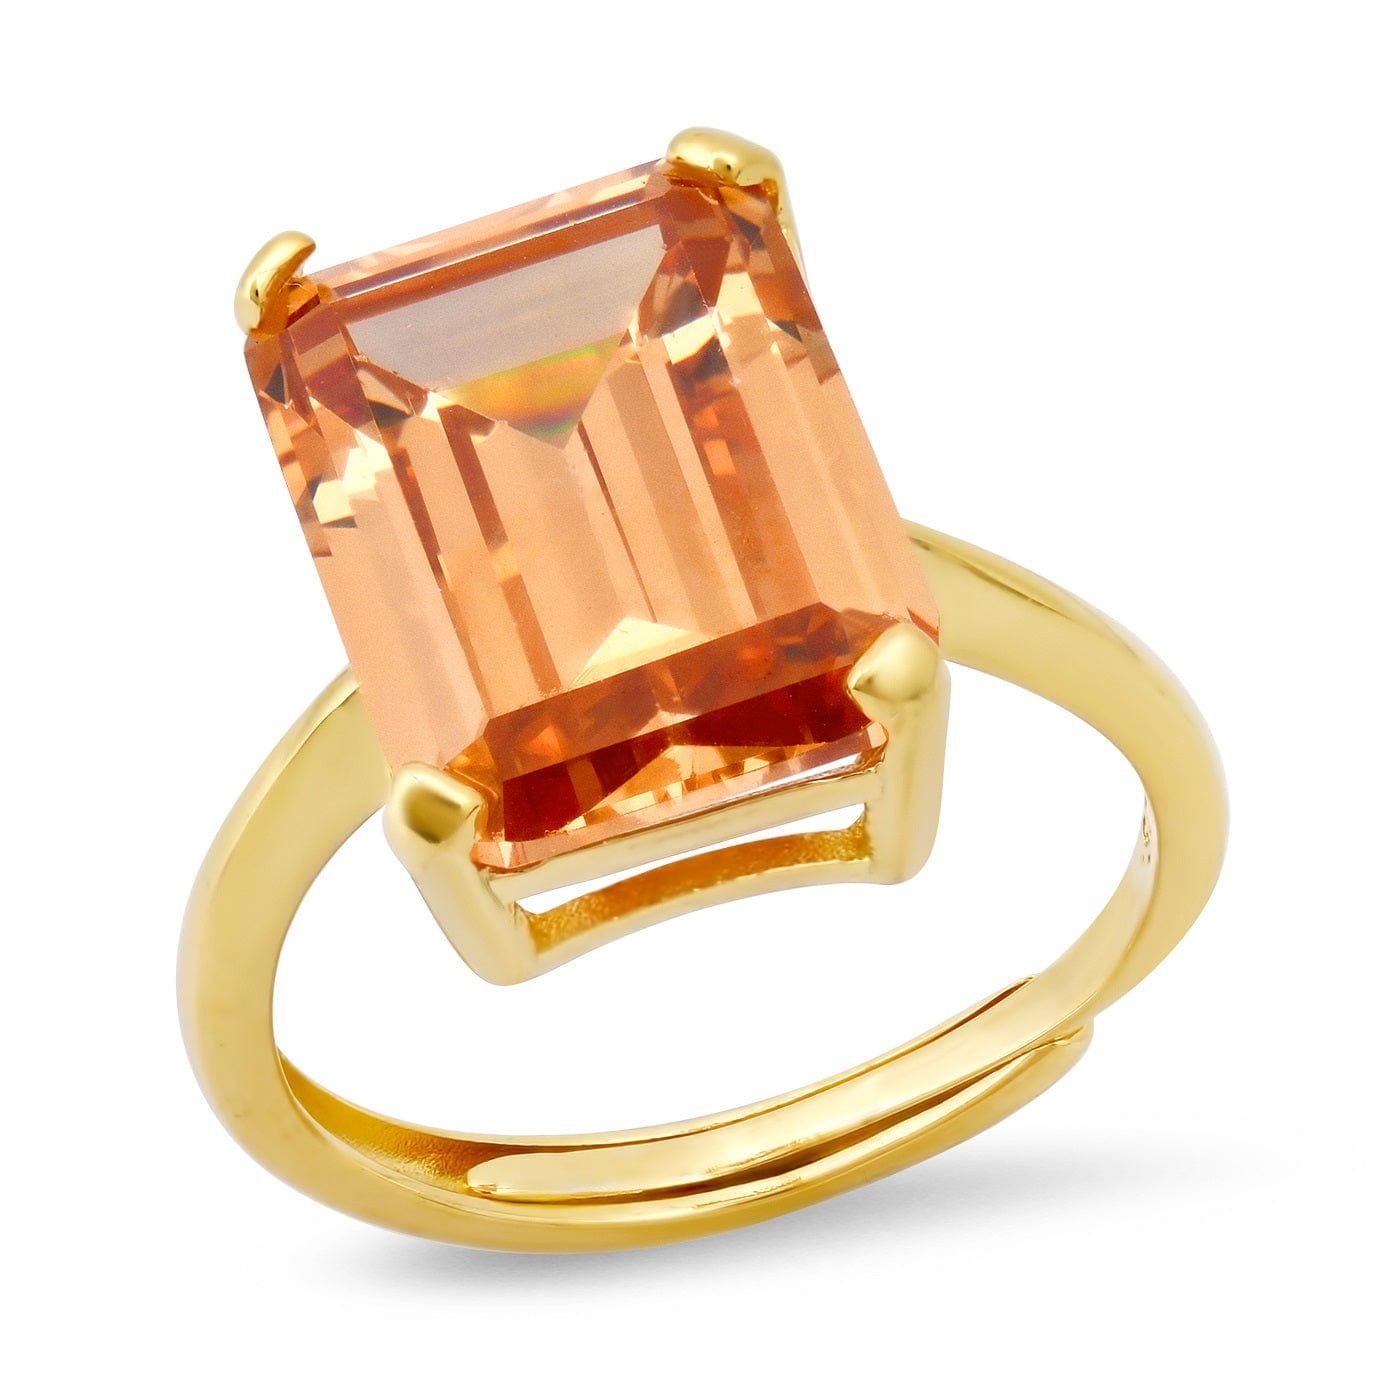 TAI JEWELRY Rings Gold Vermeil/Champagne Emerald Cut Solitaire Ring